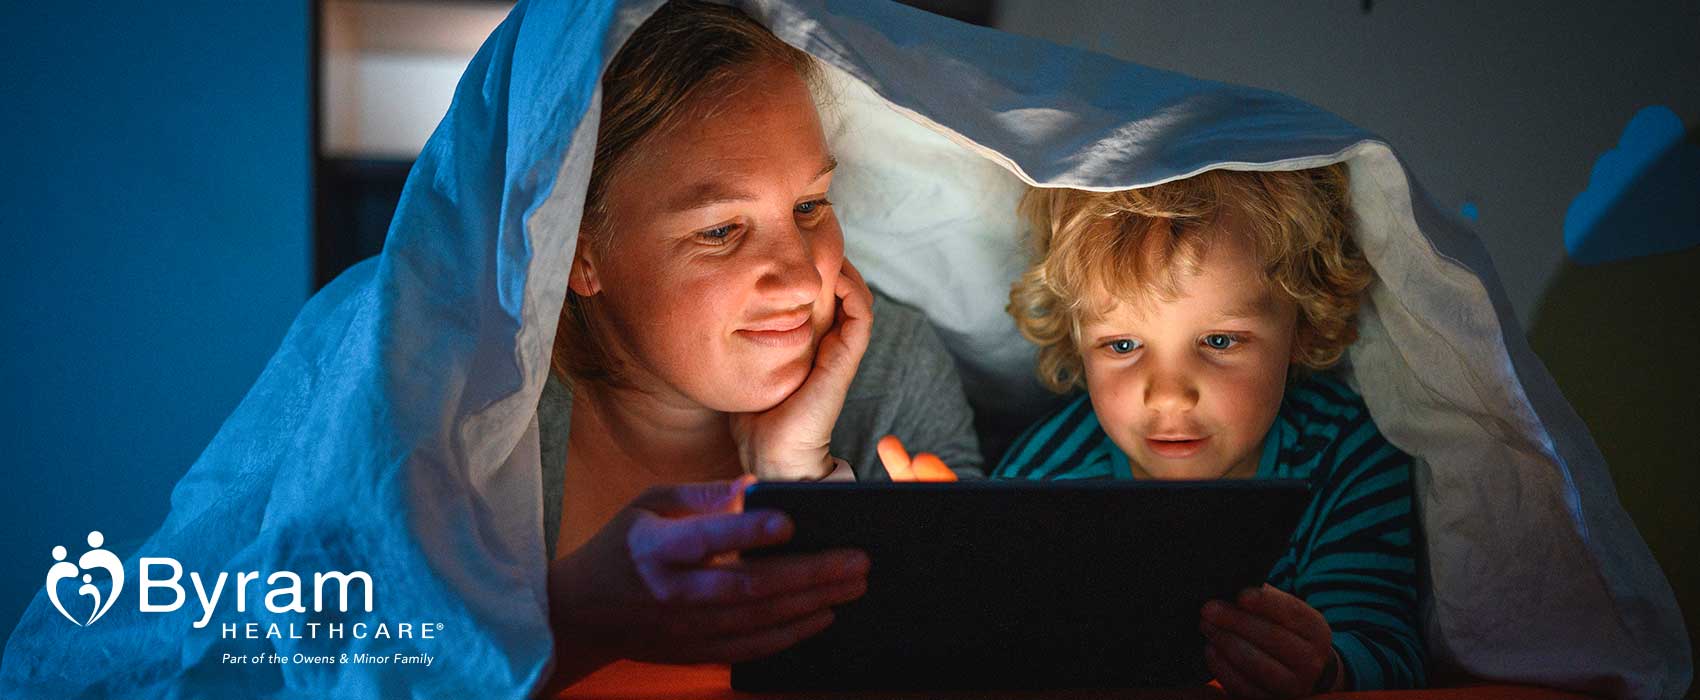 Mom and son reading a bedtime story on a tablet.